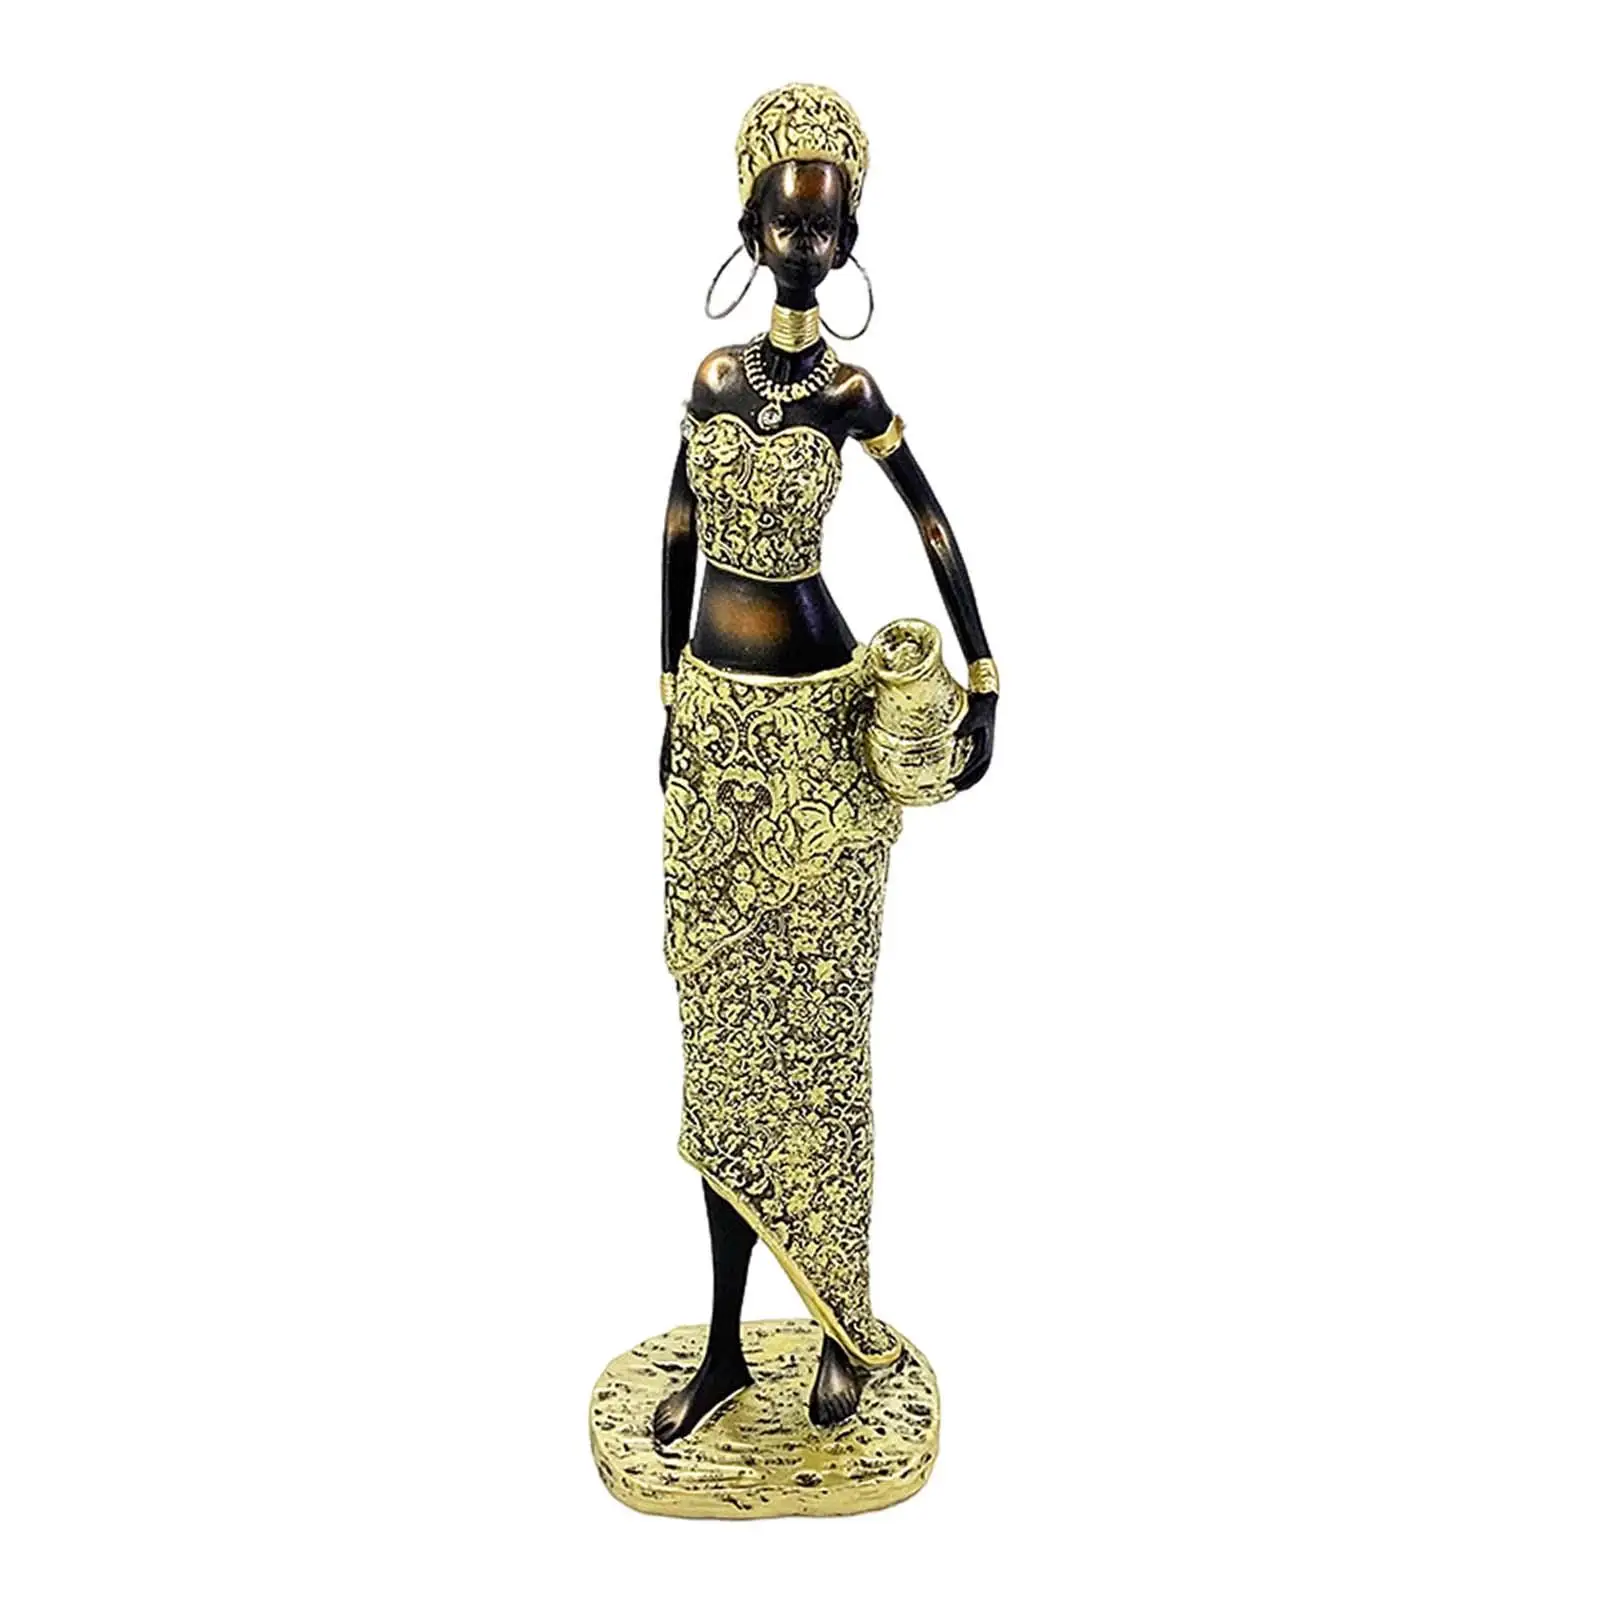 African Lady Statue People Figure Display Ornaments Women Sculpture Art Piece African Tribal Female Figurine for Desk Windowsill images - 6